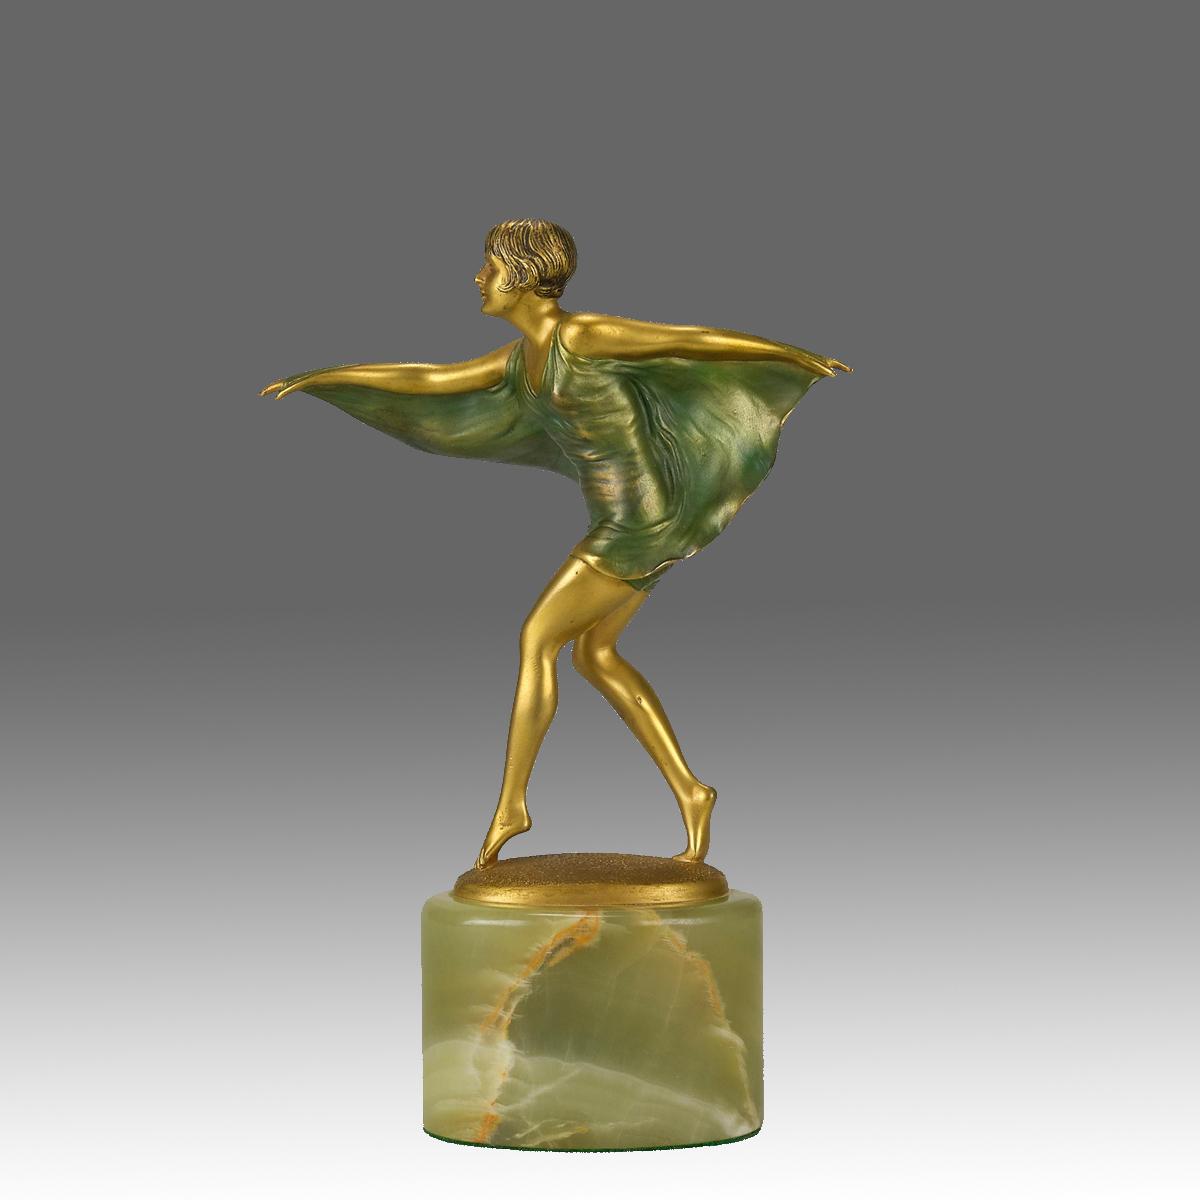 Early 20th Century Art Deco Bronze entitled "Butterfly Dancer" by Franz Iffland